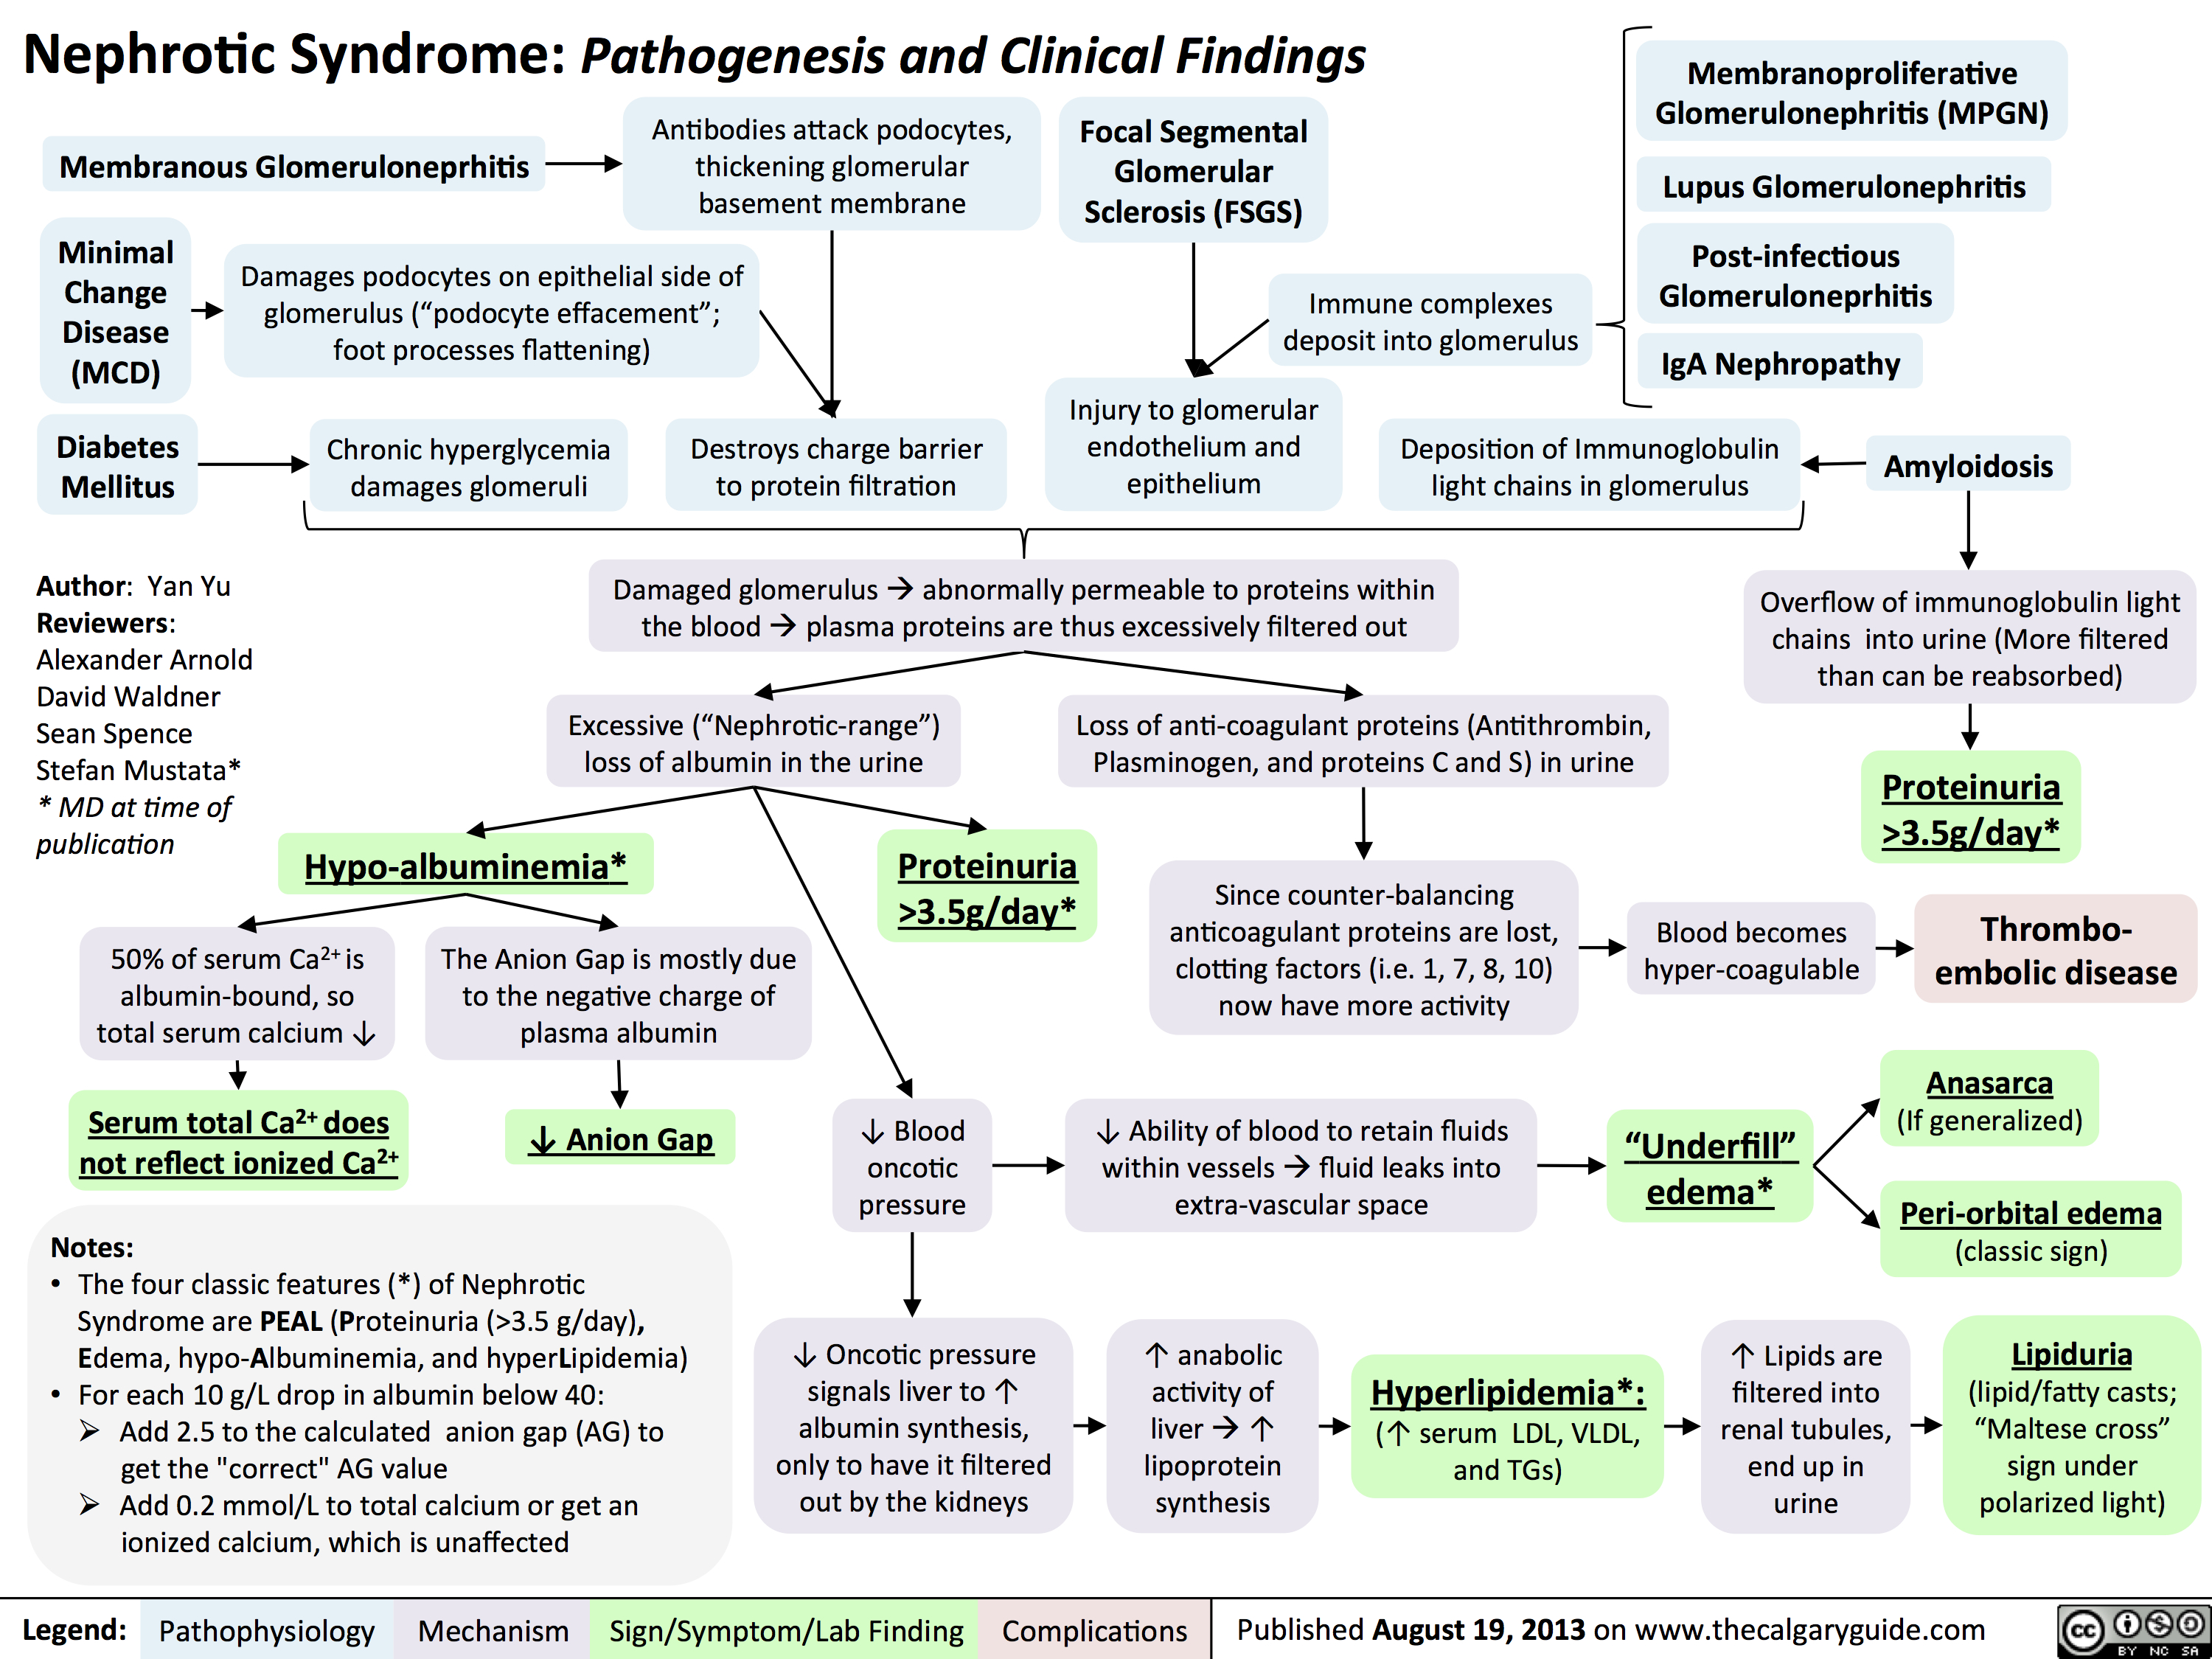 Nephrotic Syndrome: Pathogenesis and Clinical Findings